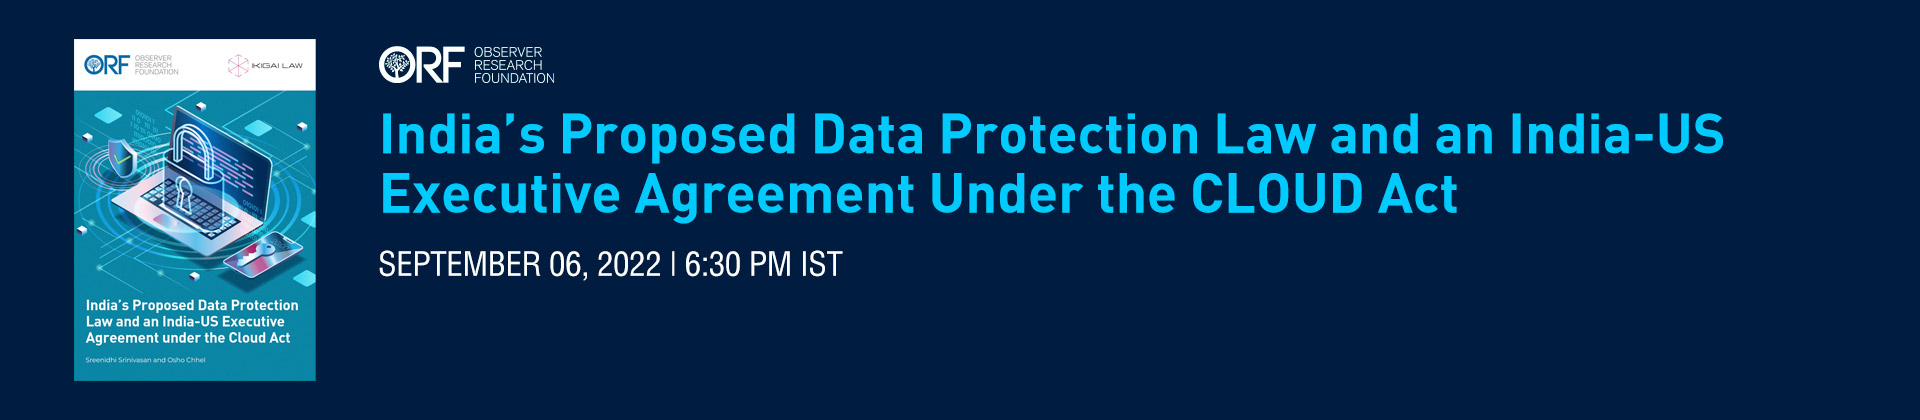 India’s Proposed Data Protection Law and an India-US Executive Agreement Under the CLOUD Act